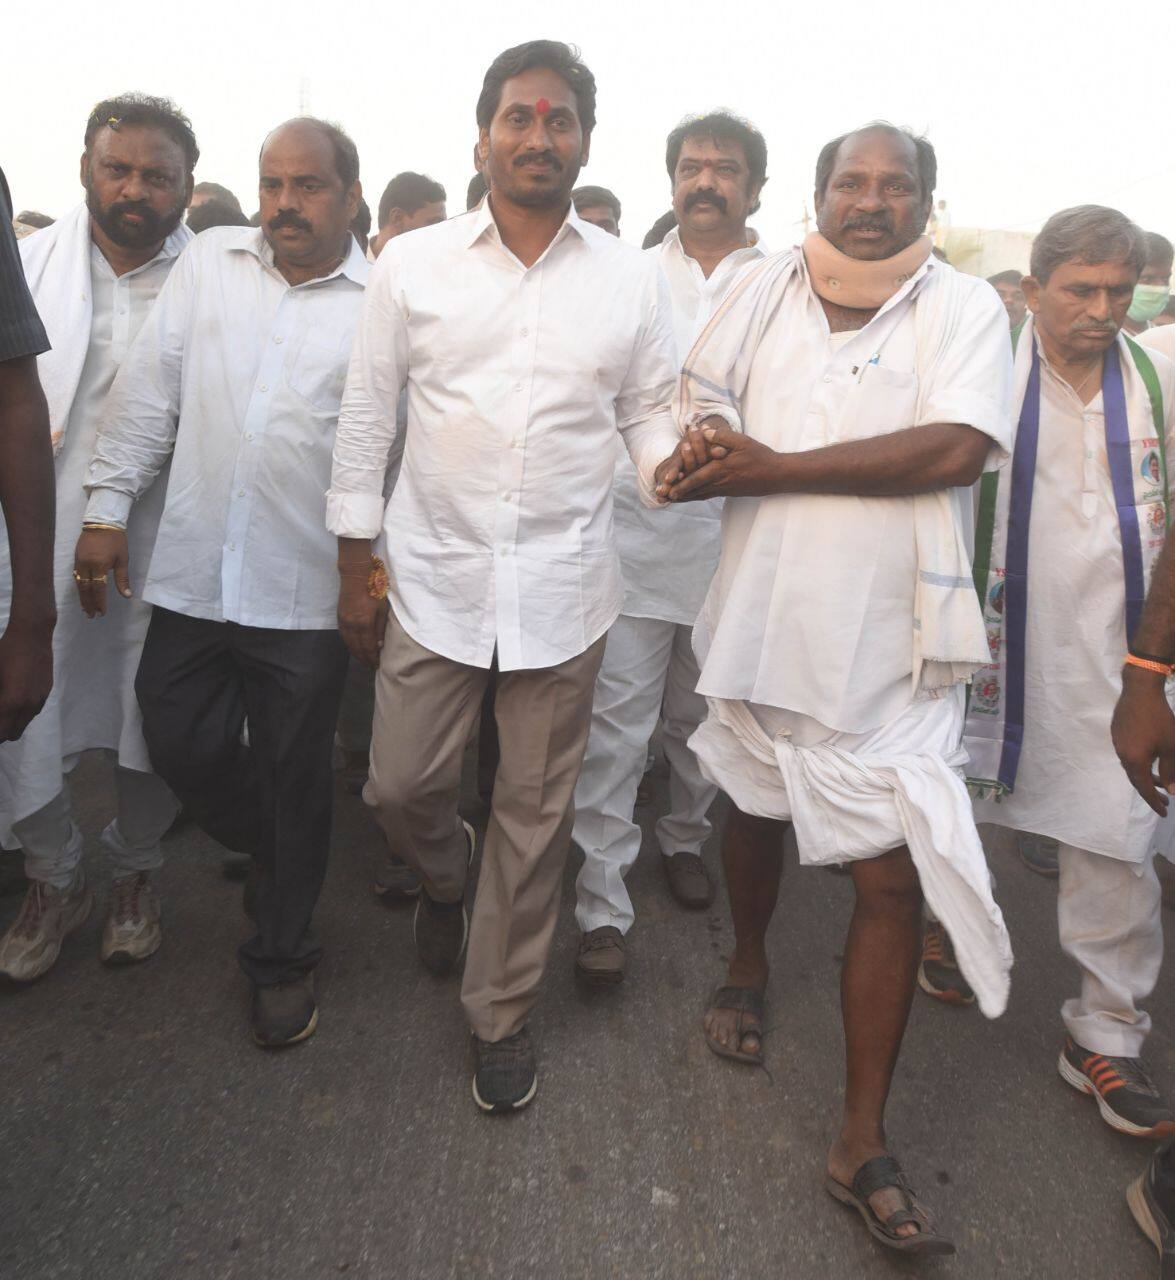 Undaunted by blisters on feet and pain Jagan continues his foot march